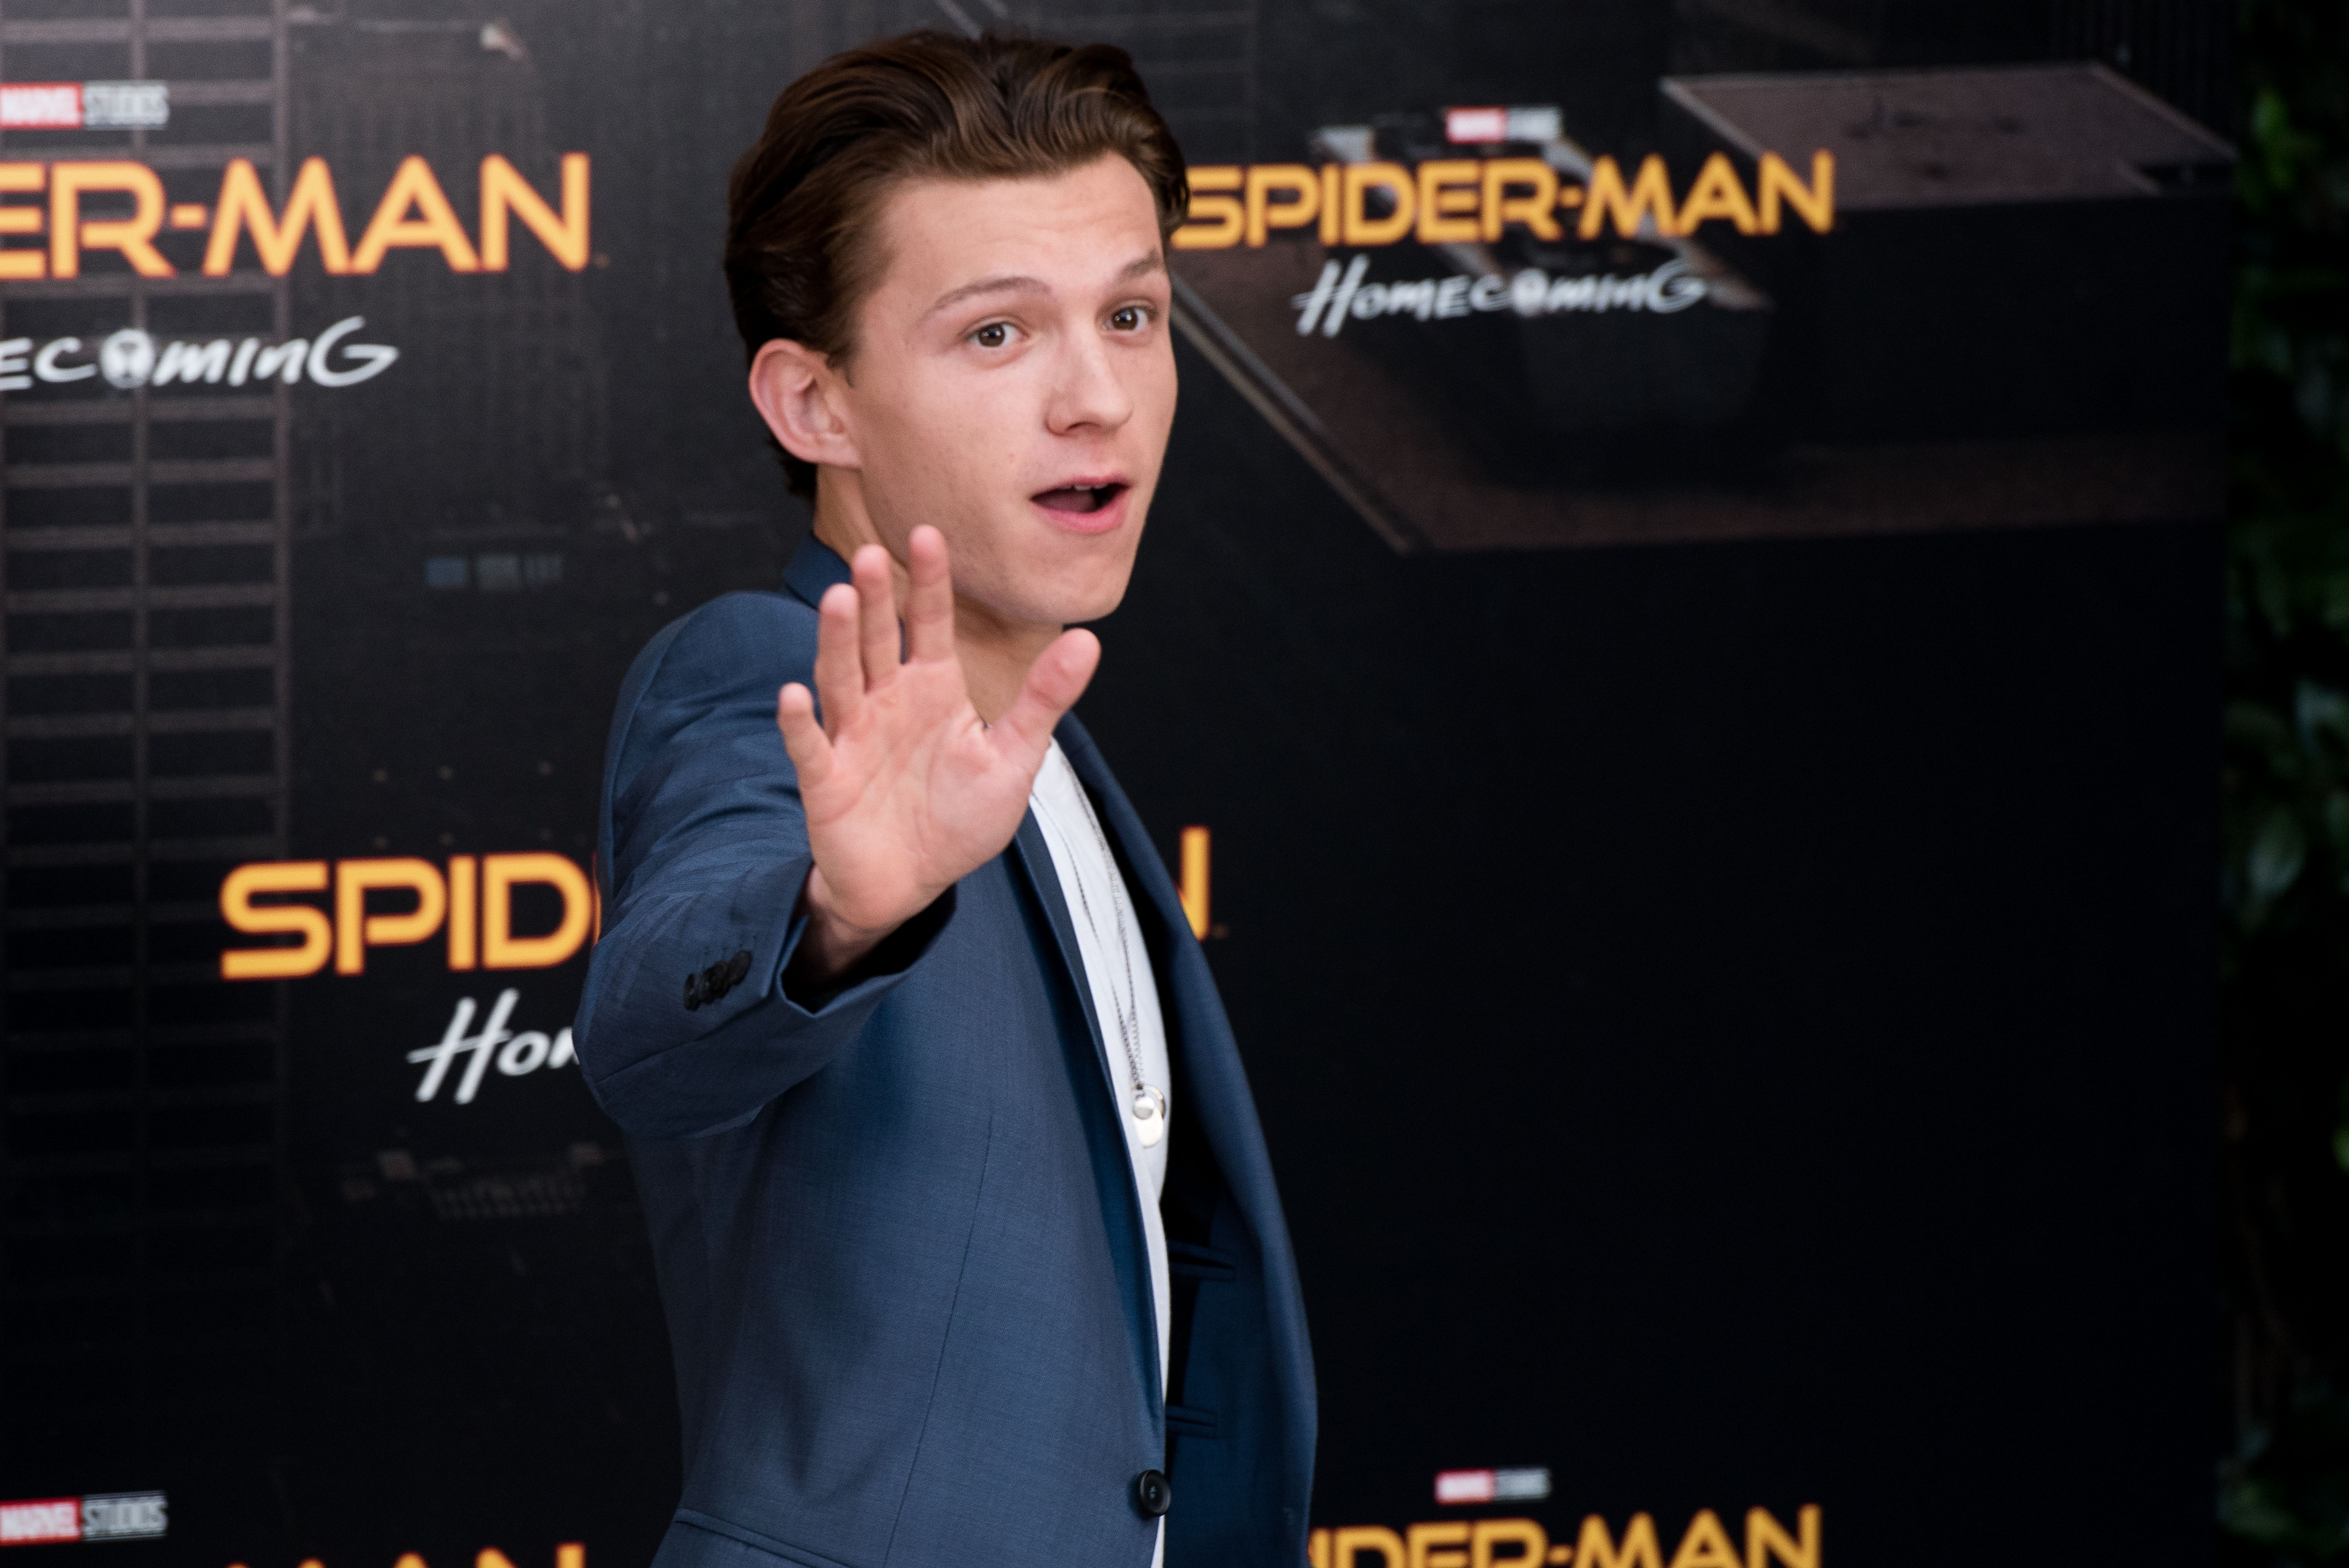 'Spider-Man: Homecoming' star Tom Holland waves to the camera, wearing a blue suit jacket over a white shirt.